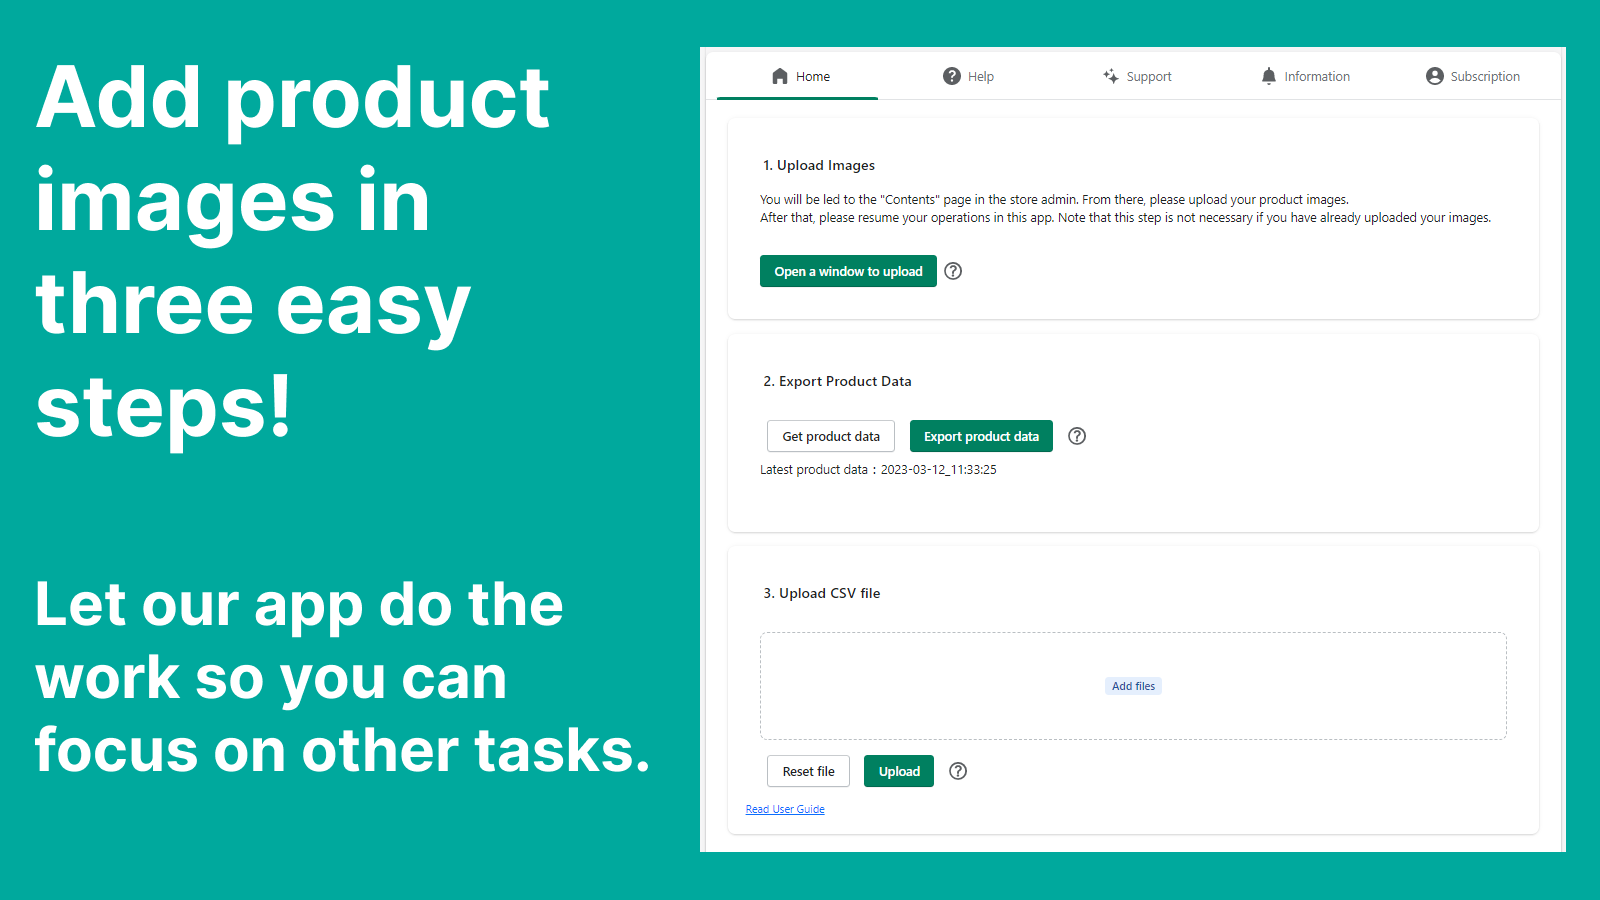 Automatically upload product images in just three simple steps!